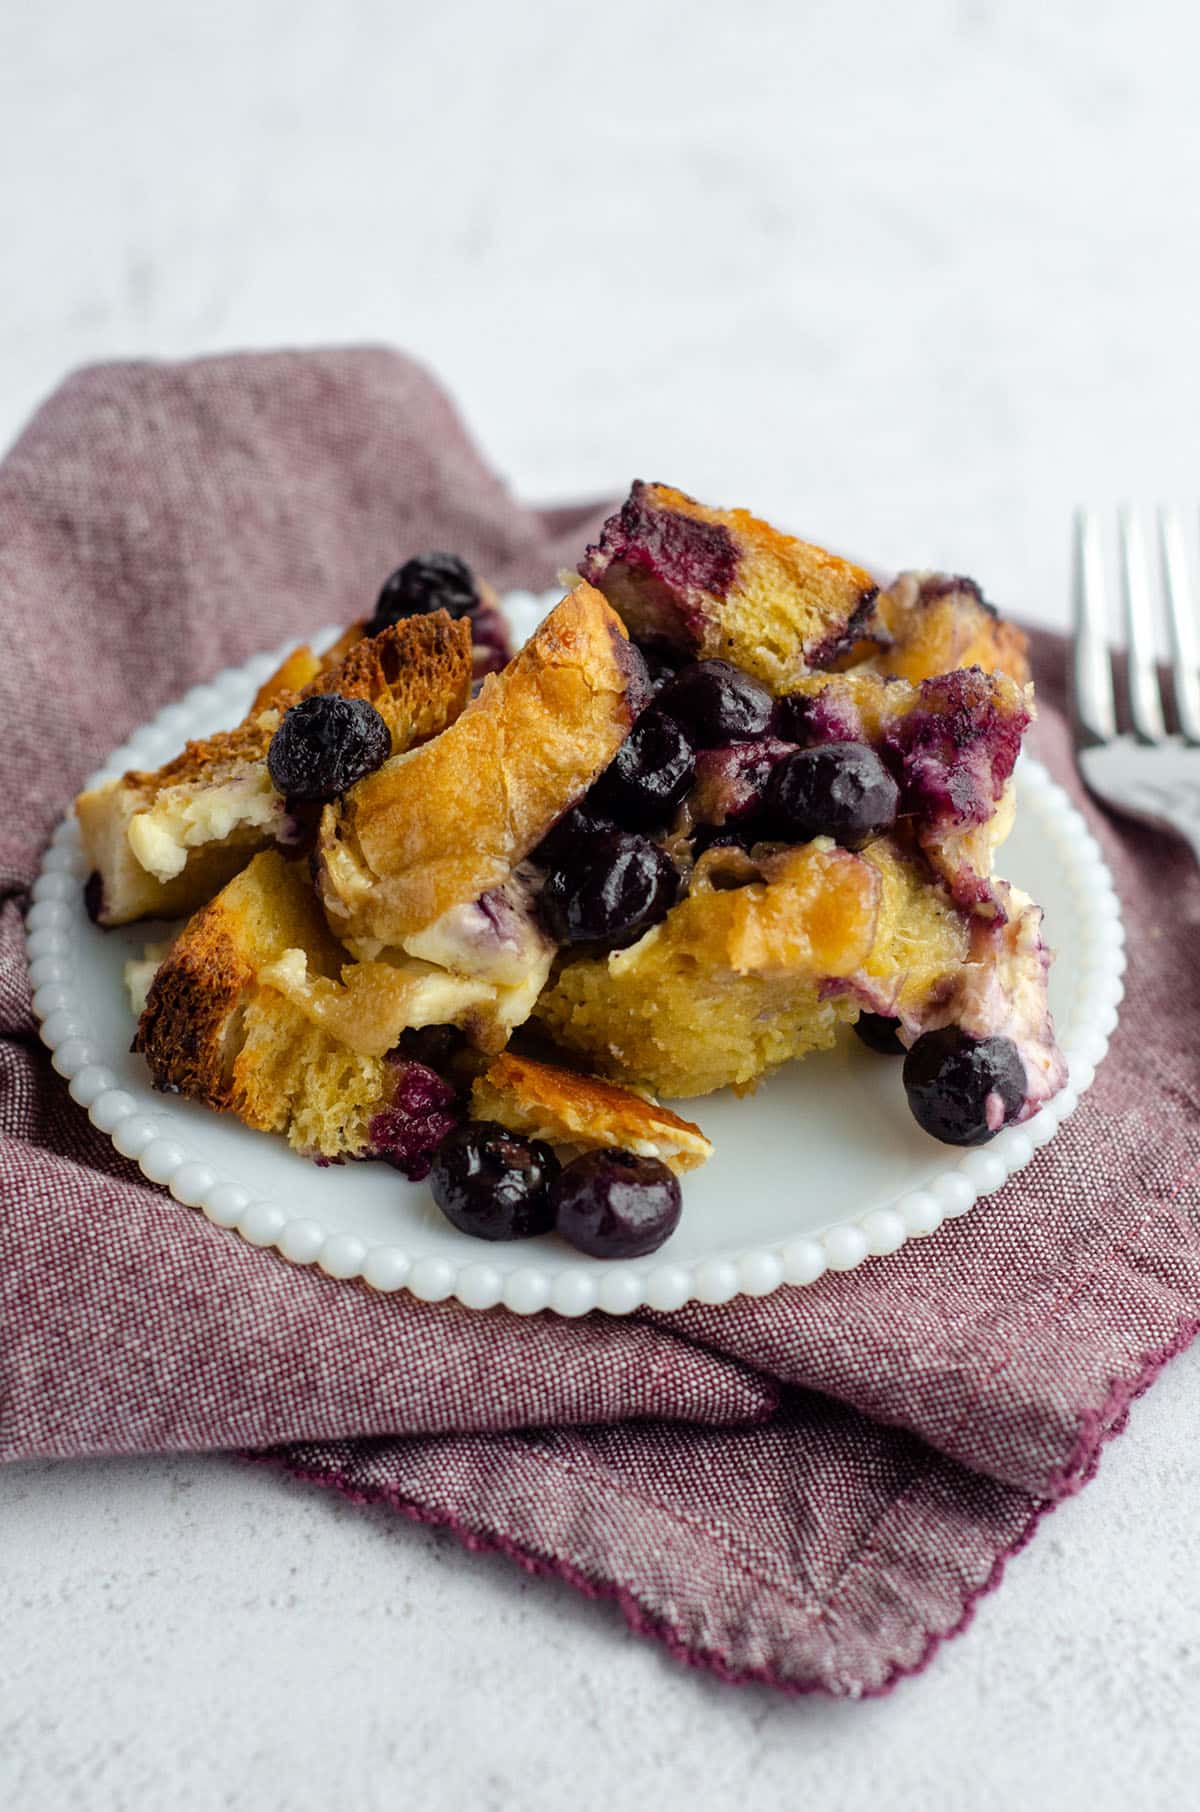 baked blueberry french toast sitting on a white plate with a plum colored kitchen towel